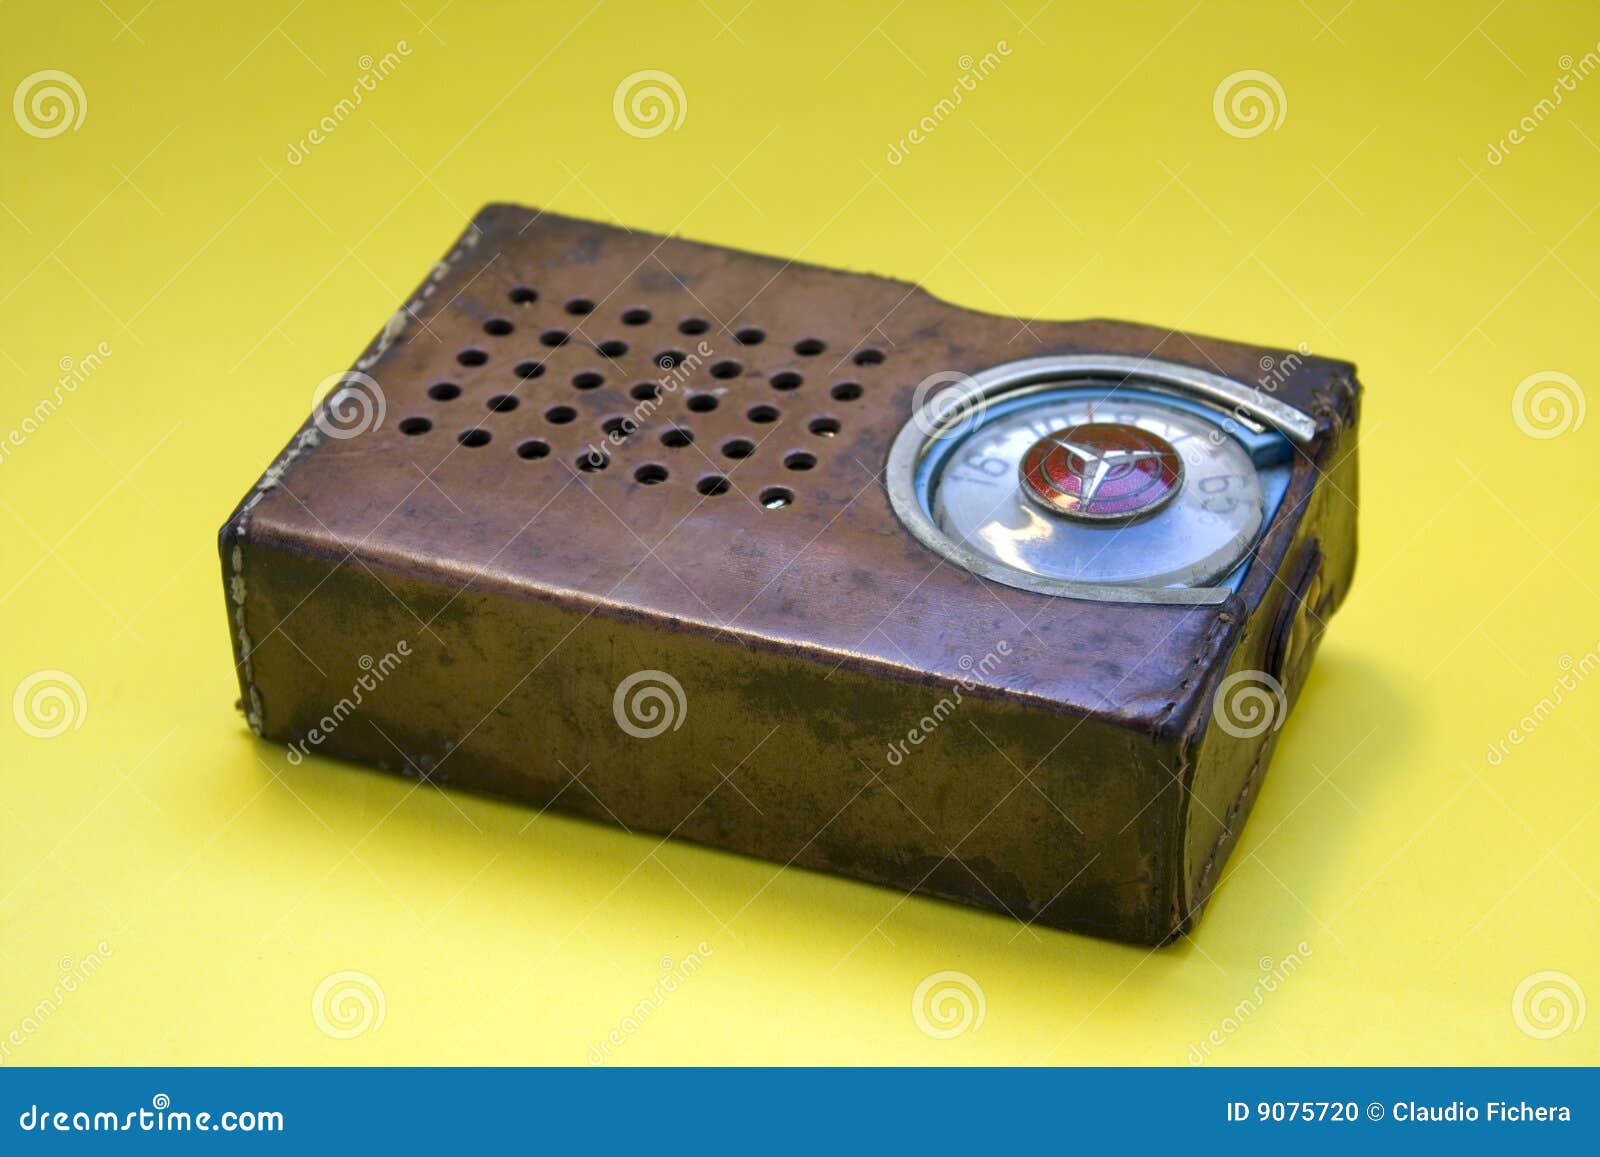 Radio Spica Photos - Free & Royalty-Free Stock Photos from Dreamstime